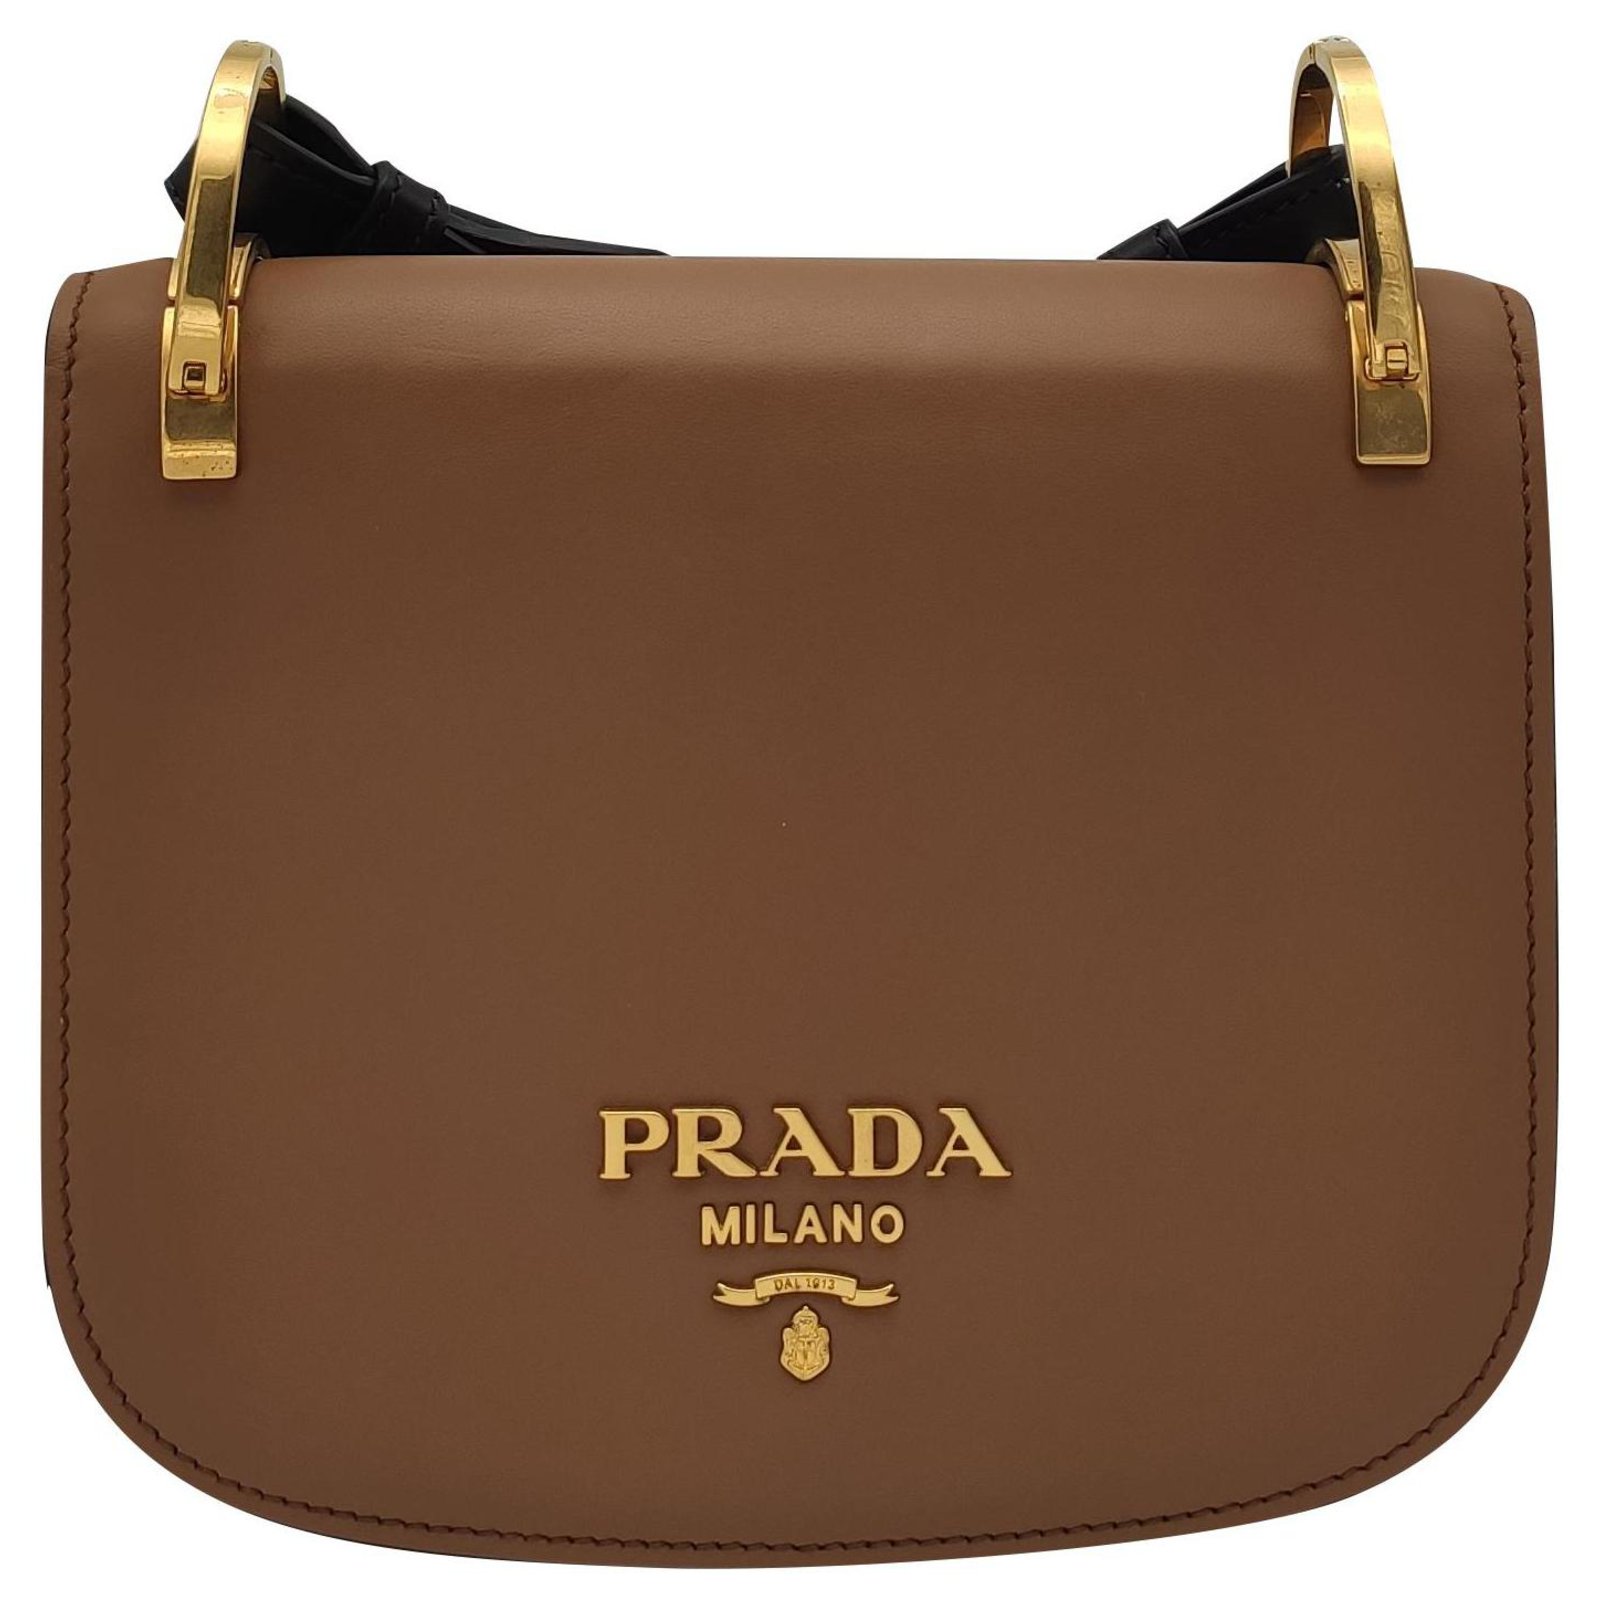 The Best Prada Bags For Expressing Your Personal Style, 41% OFF